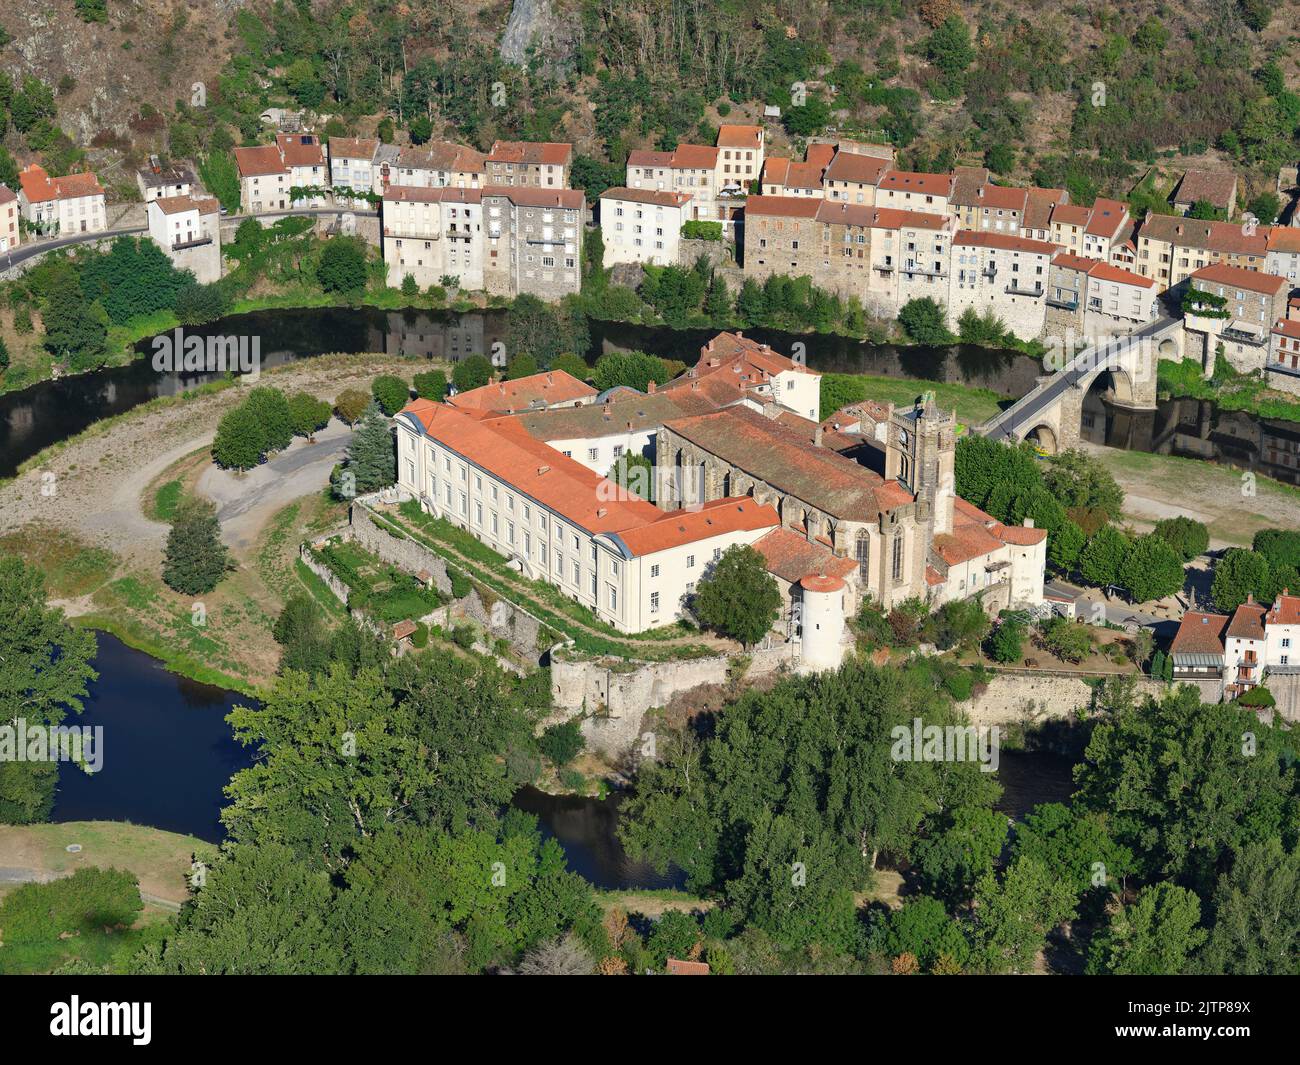 AERIAL VIEW. Priory of Sainte-Croix within a meander of the Allier River. Lavoûte-Chilhac, Haute-Loire, Auvergne-Rhône-Alpes, France. Stock Photo